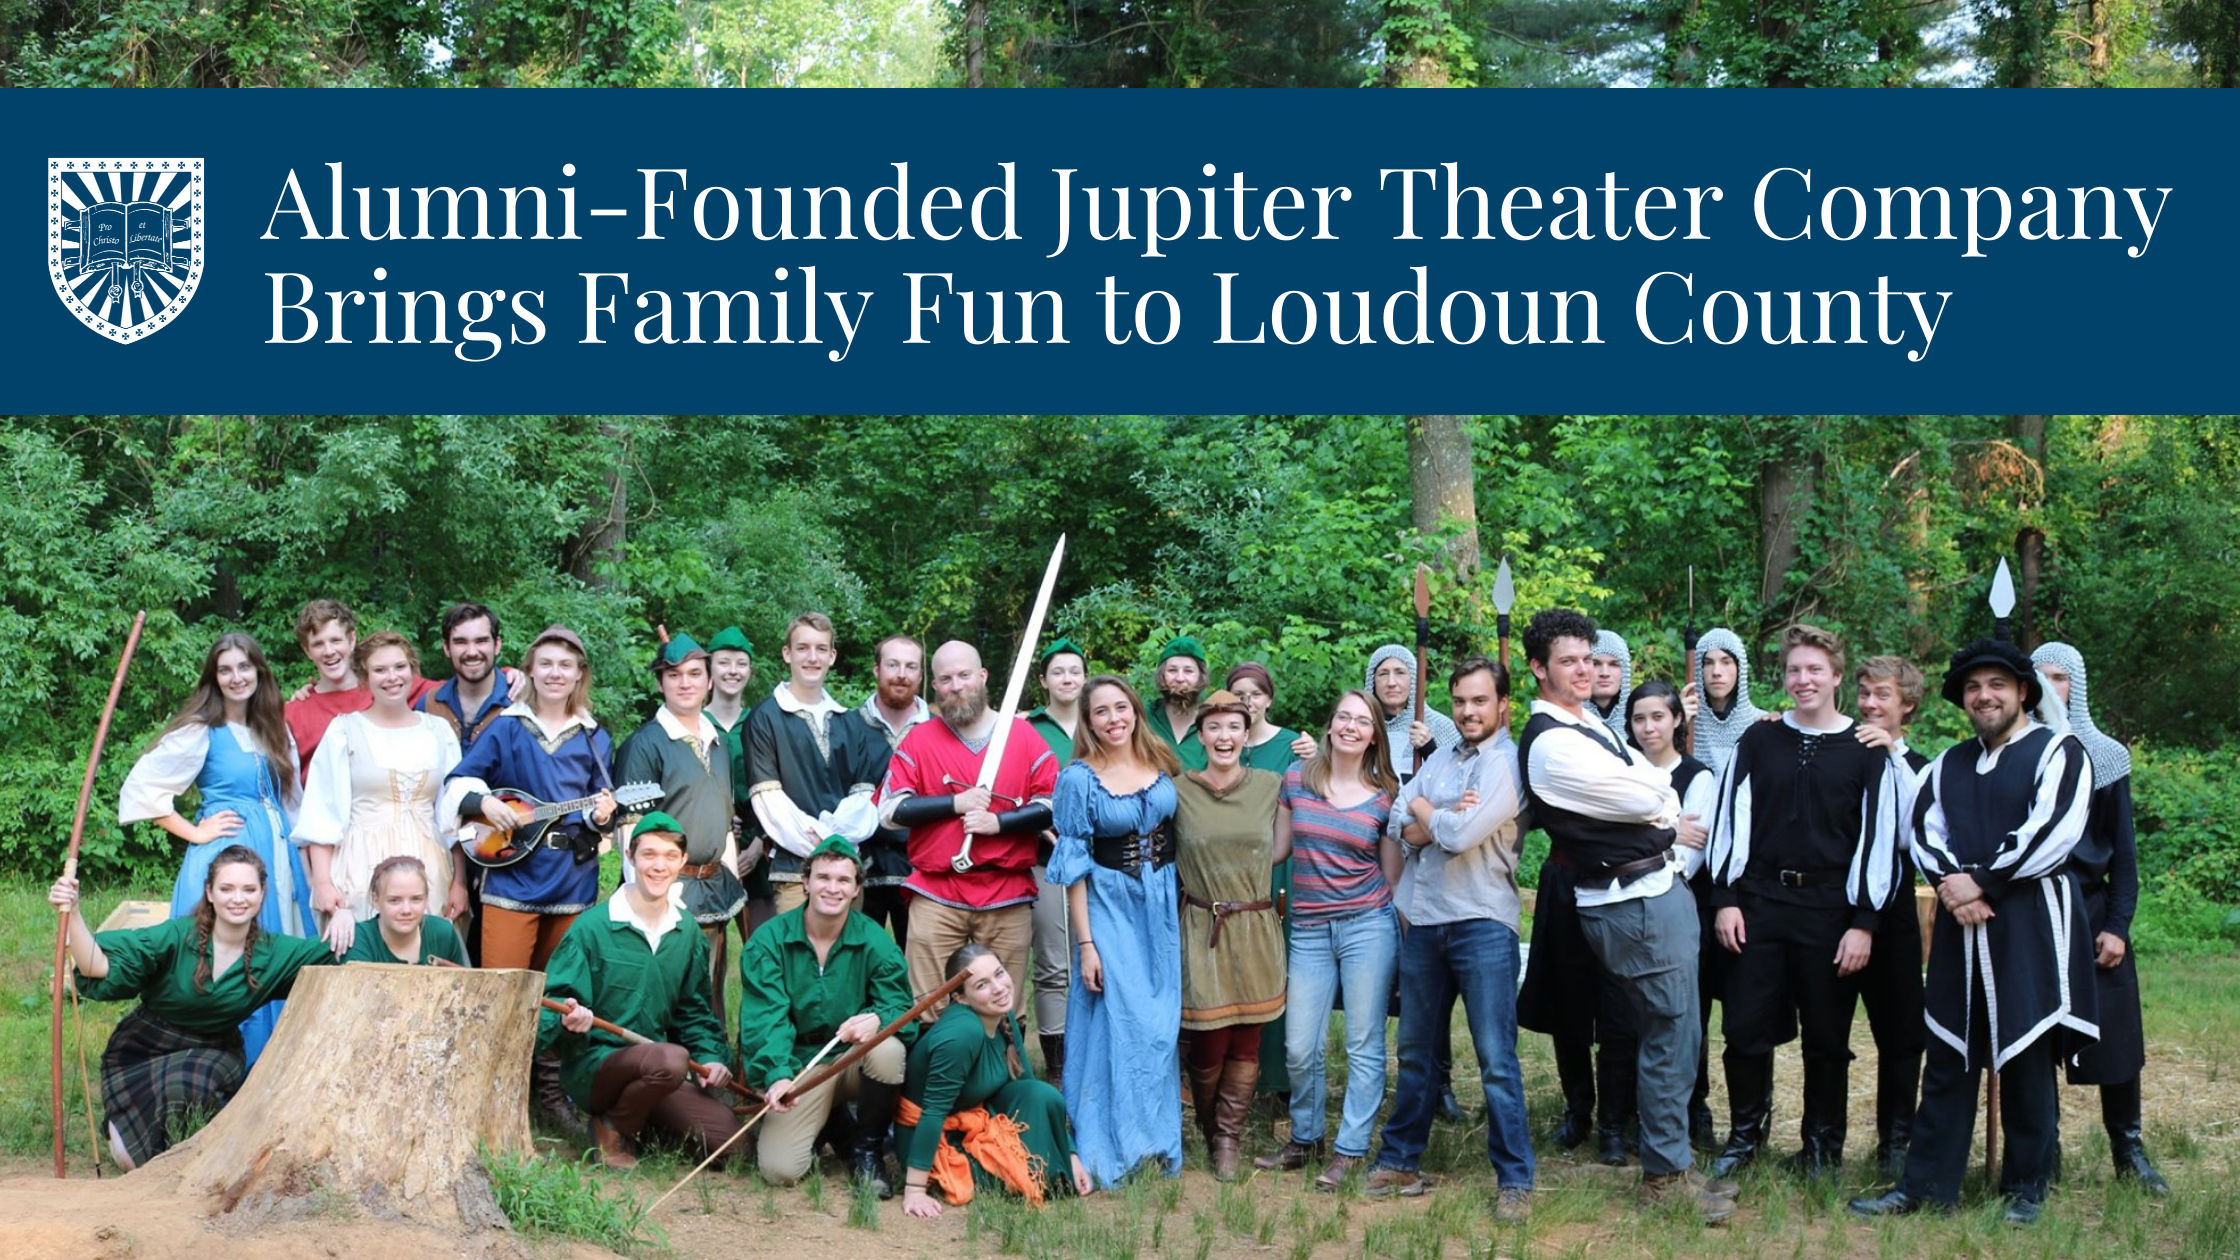 Alumni-Founded Jupiter Theater Company Brings Family Fun to Loudoun County